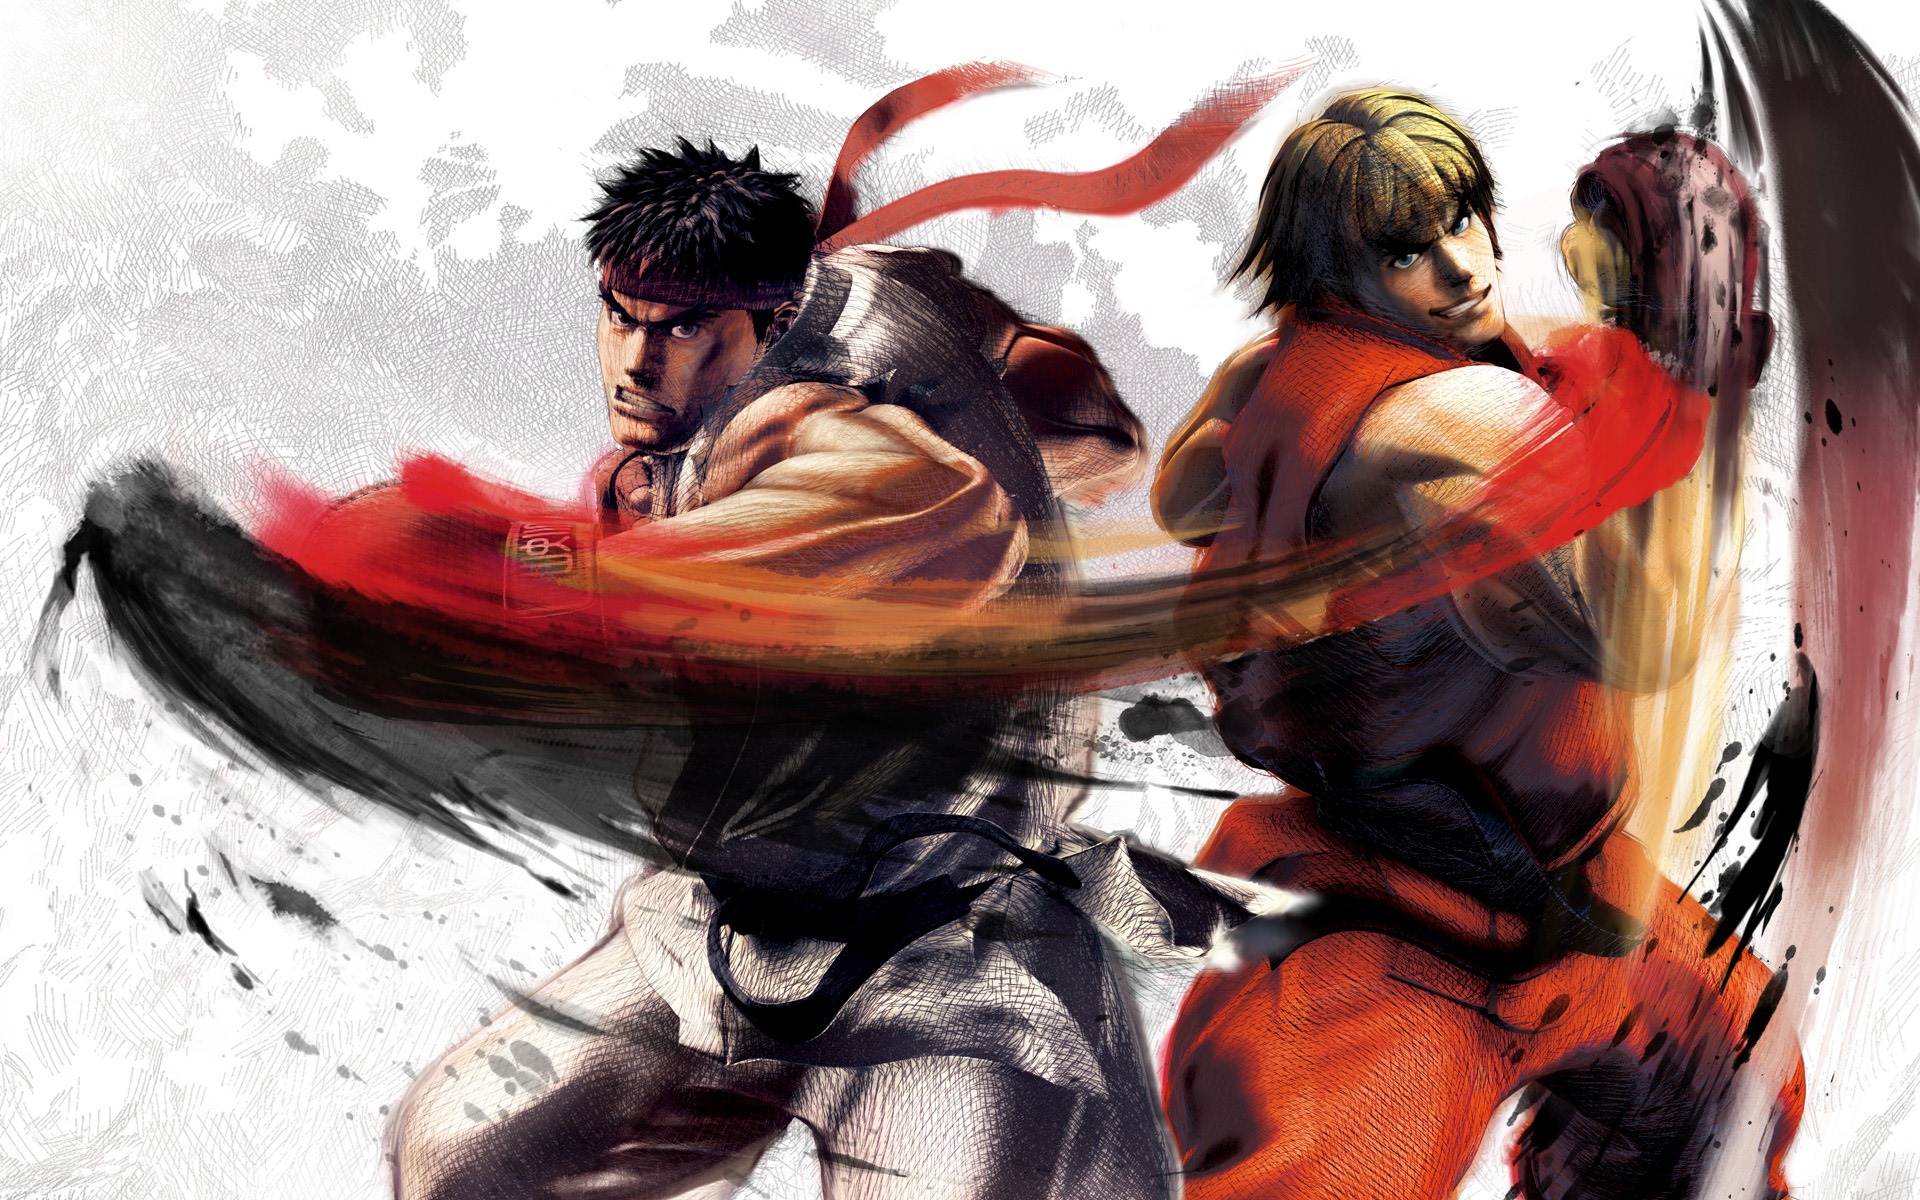  Free Modern Street Fighter HD The Wallpapers 1920x1200 HD